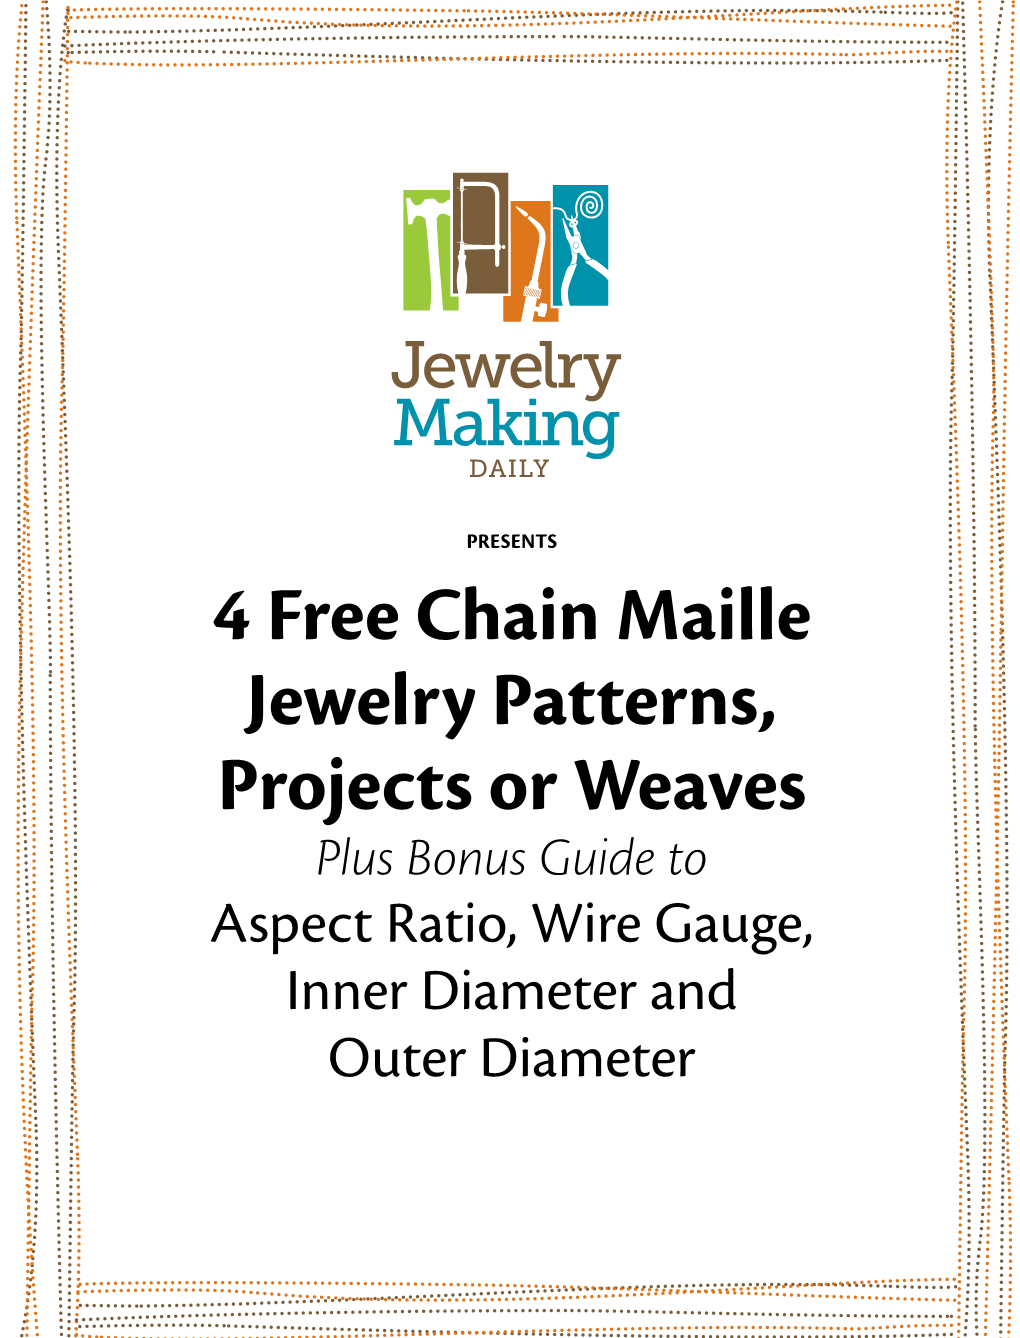 JMD 4 Free Chain Maille Jewelry Patterns, Projects Or Weaves Plus